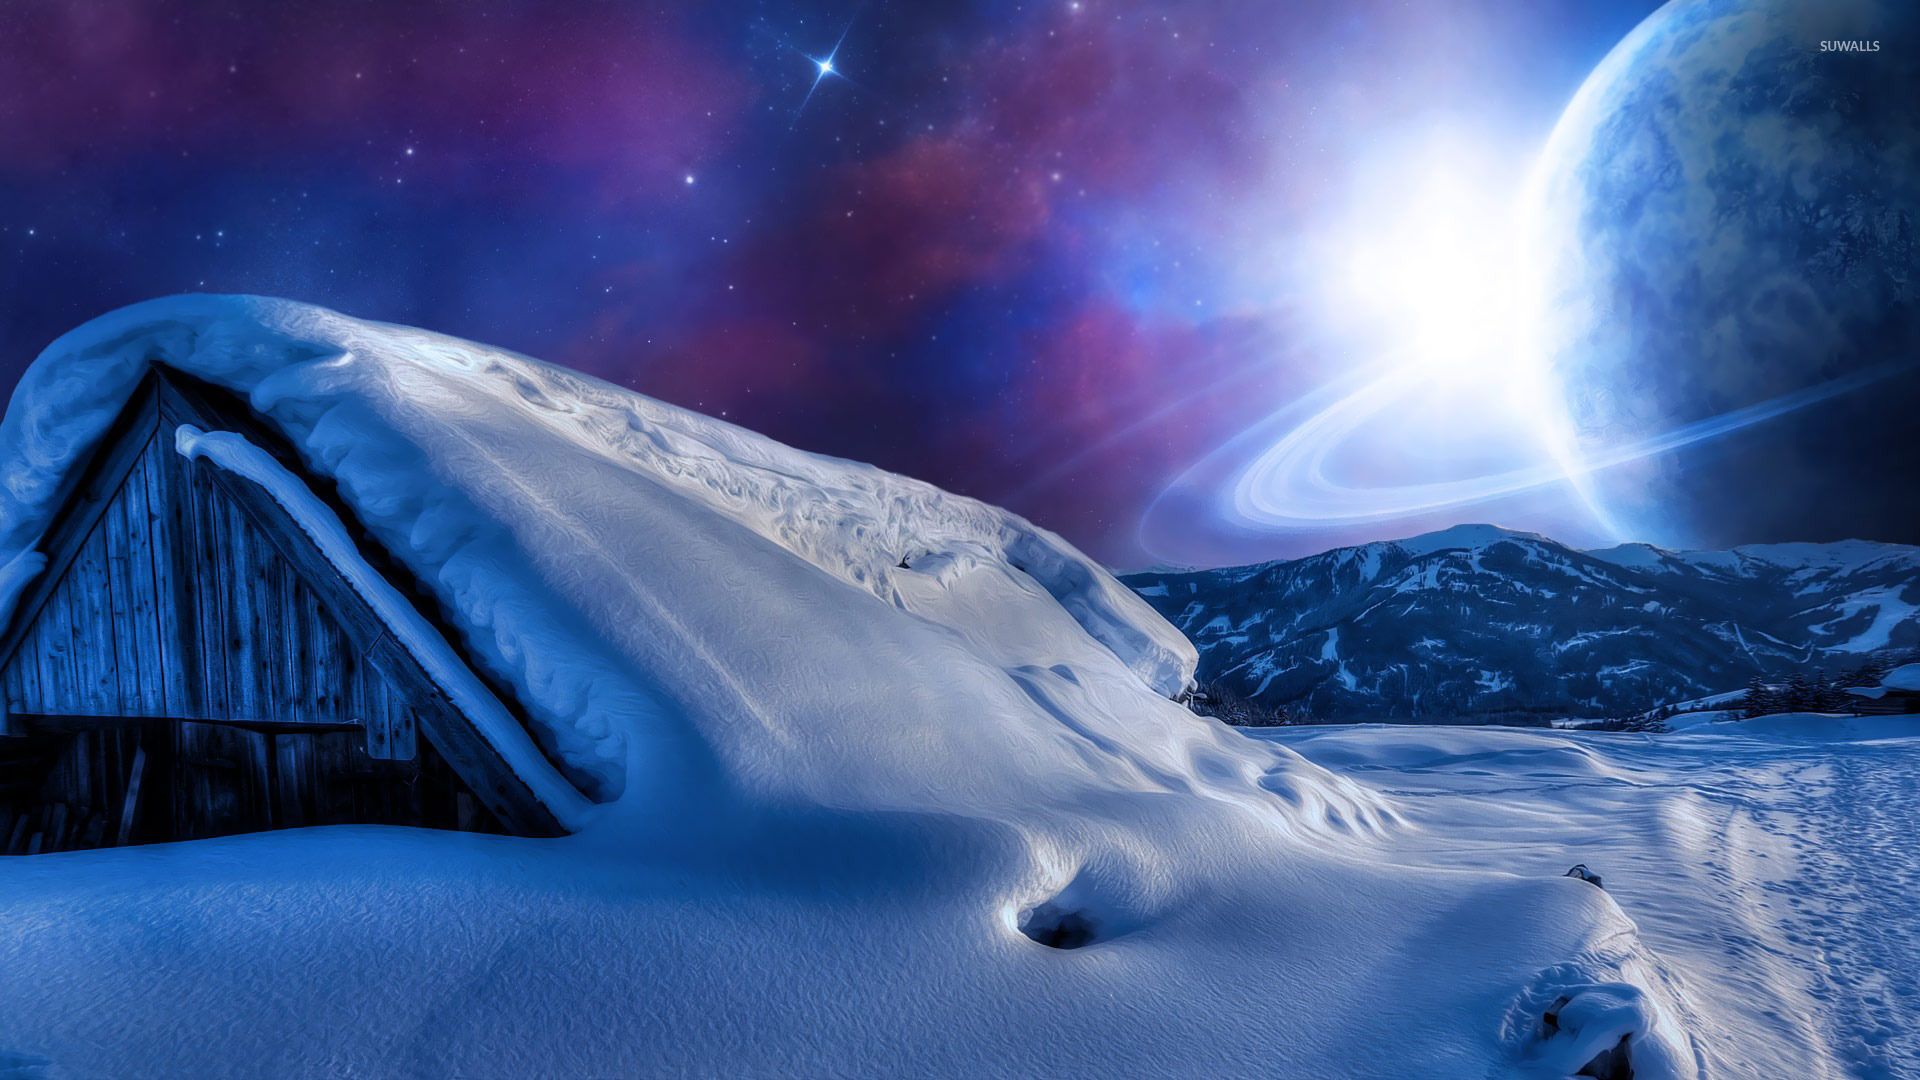 Planet in the sky during a winter night wallpaper wallpaper